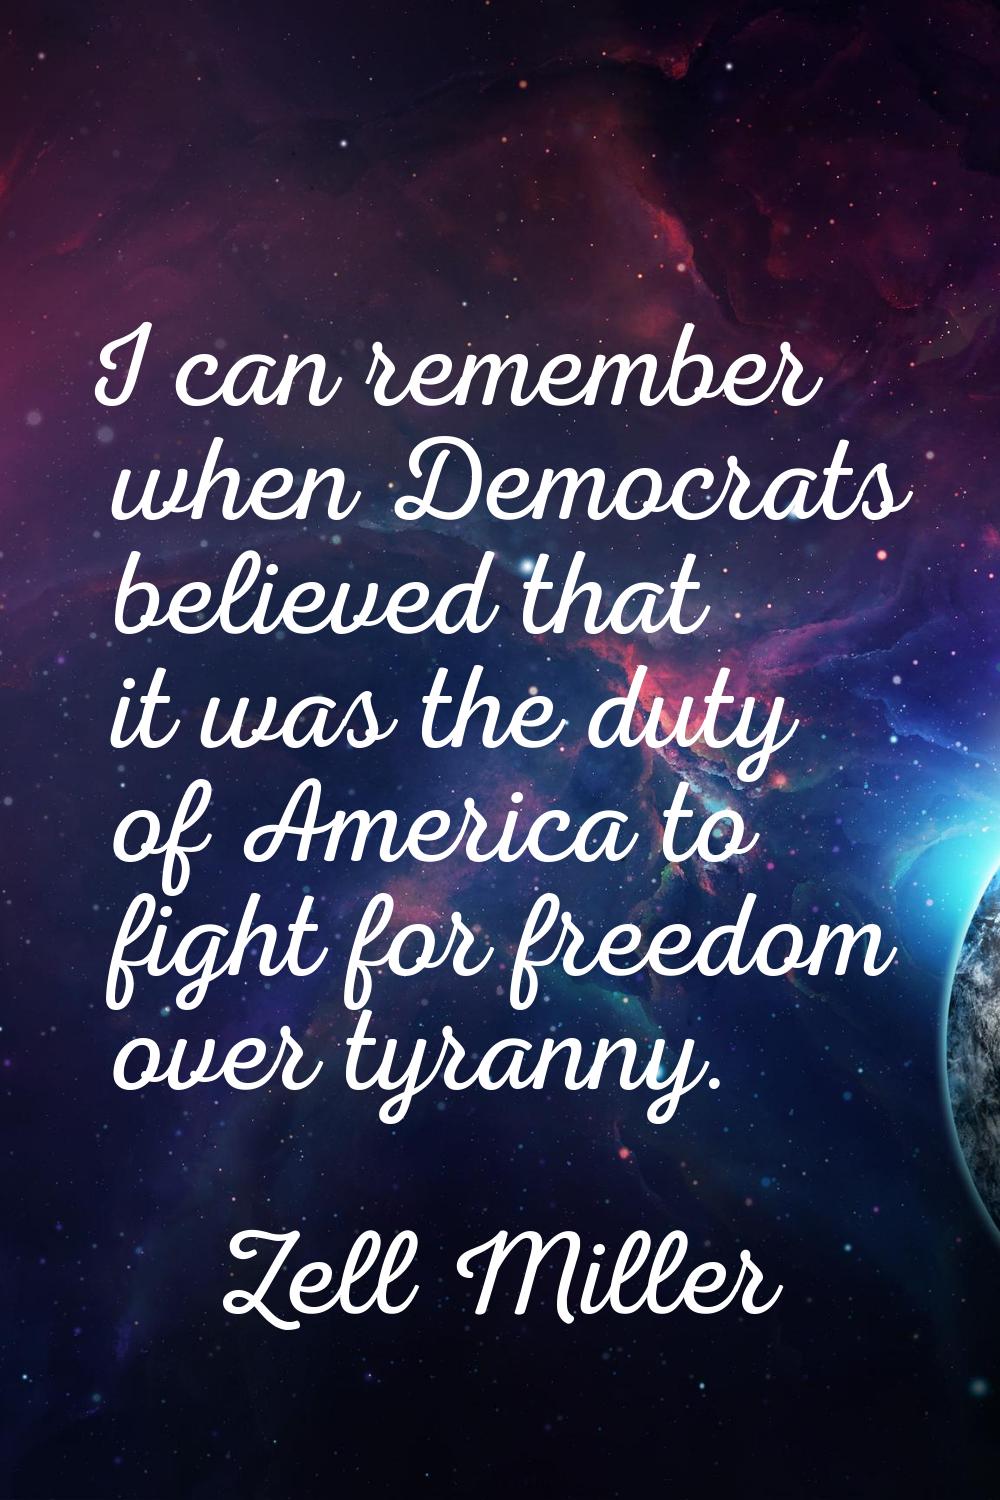 I can remember when Democrats believed that it was the duty of America to fight for freedom over ty